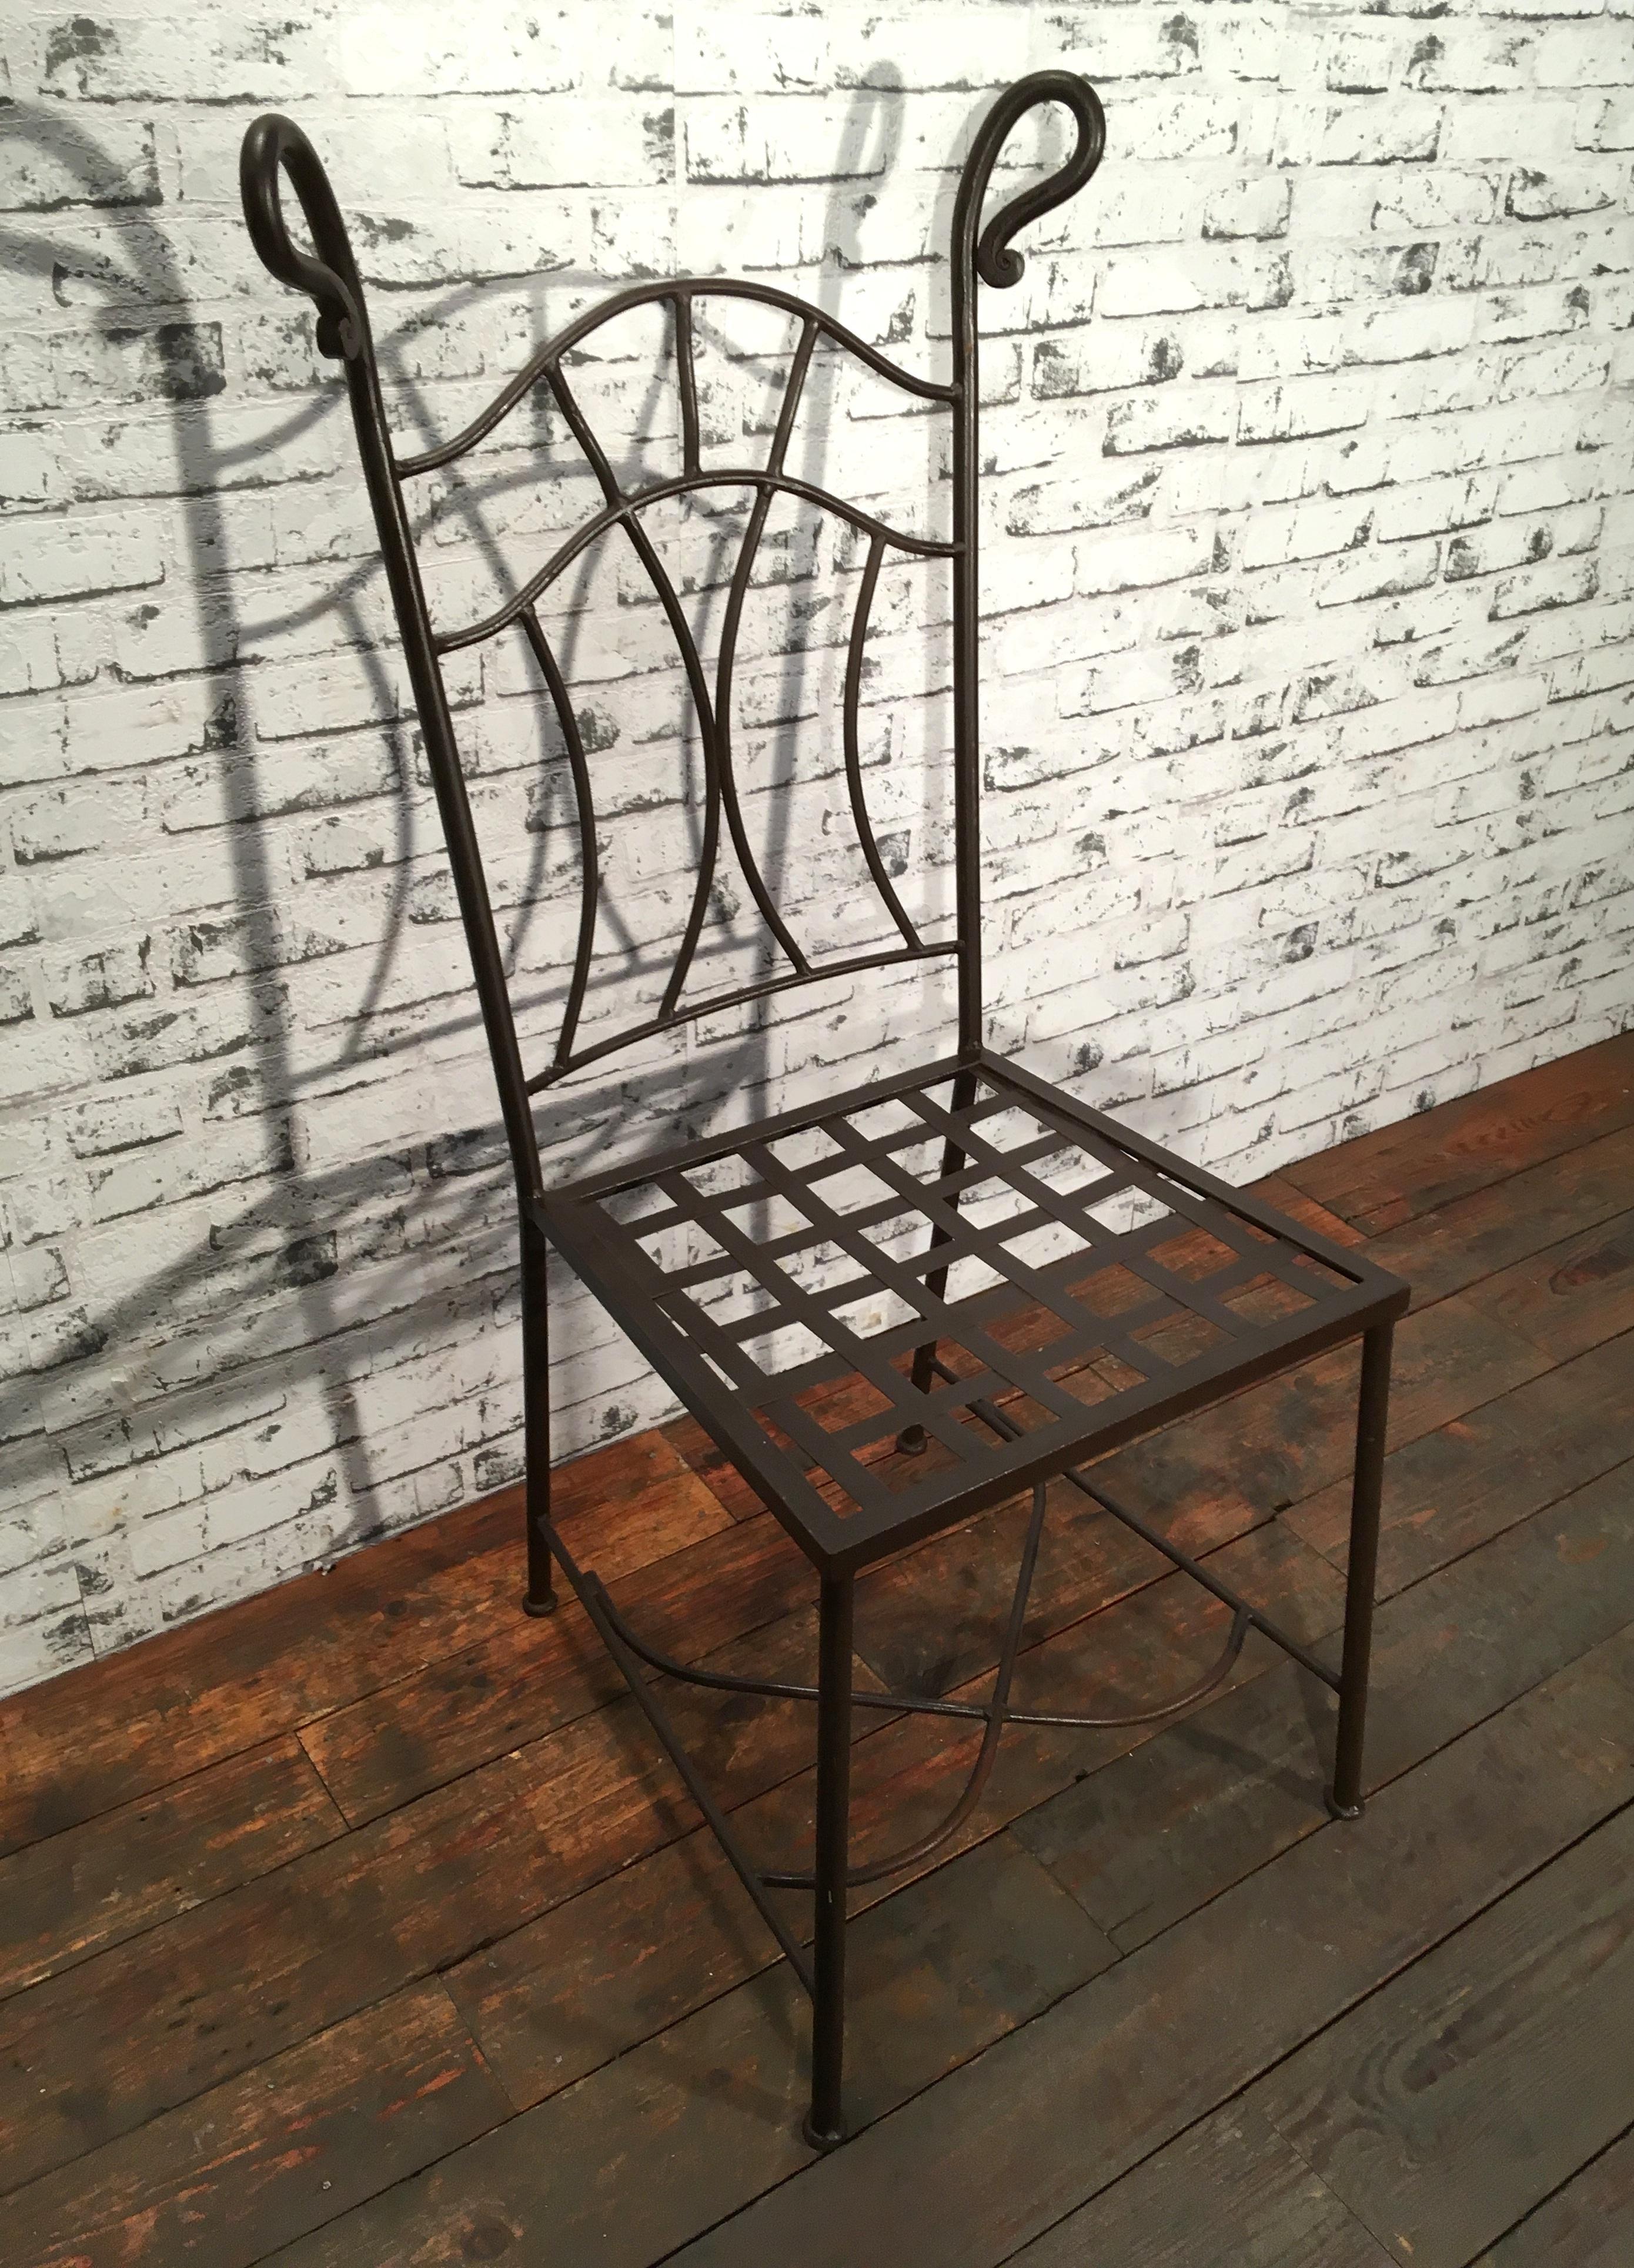 Vintage iron chair made by an art blacksmith during the 1930s. 
Weight of the chair is 7 kg.
Dimensions of the seat : 44x41 cm